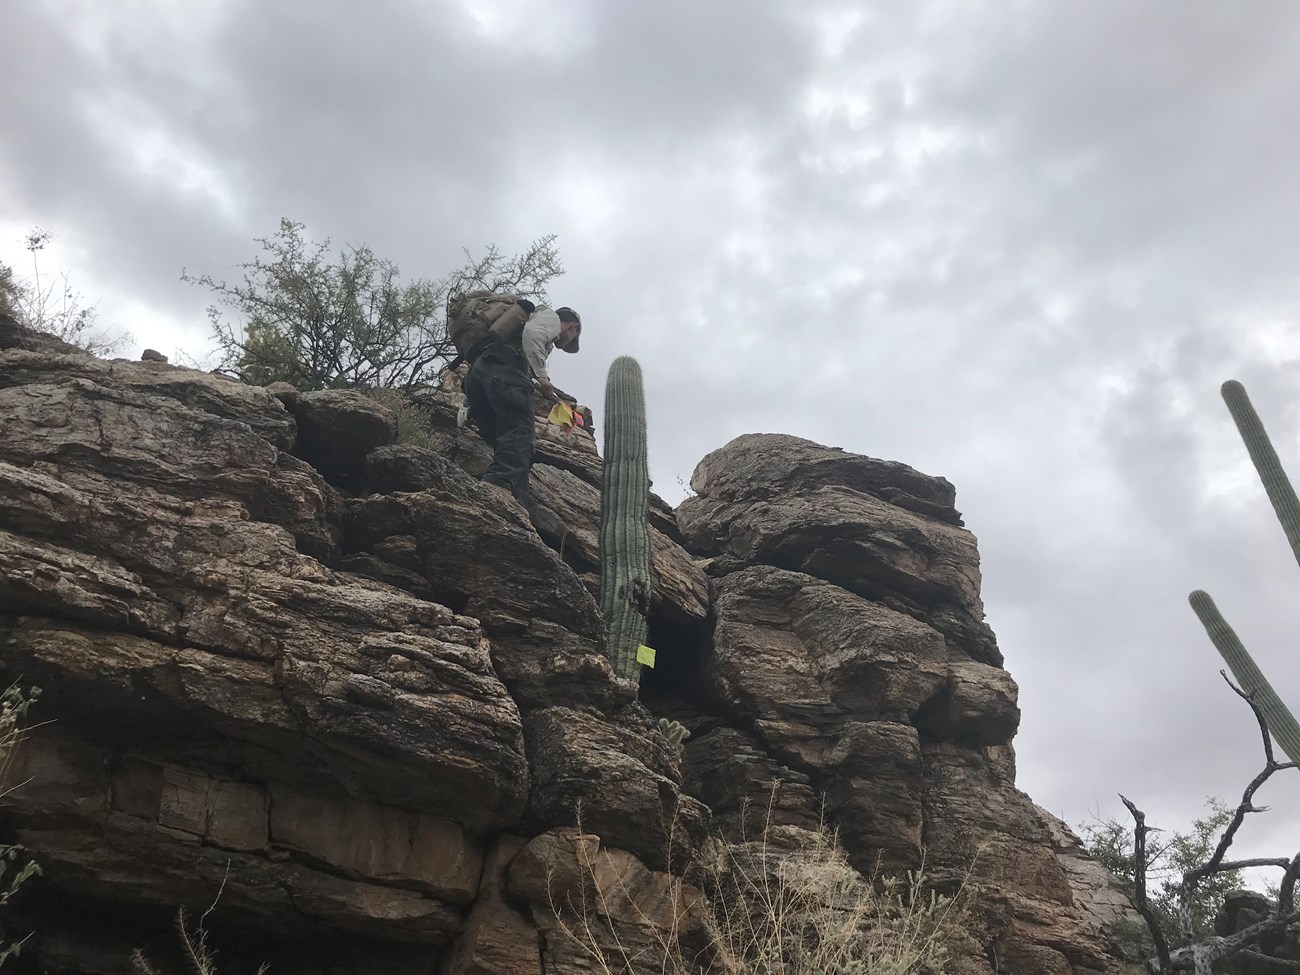 A man next to a saguaro growing on the side of small cliff